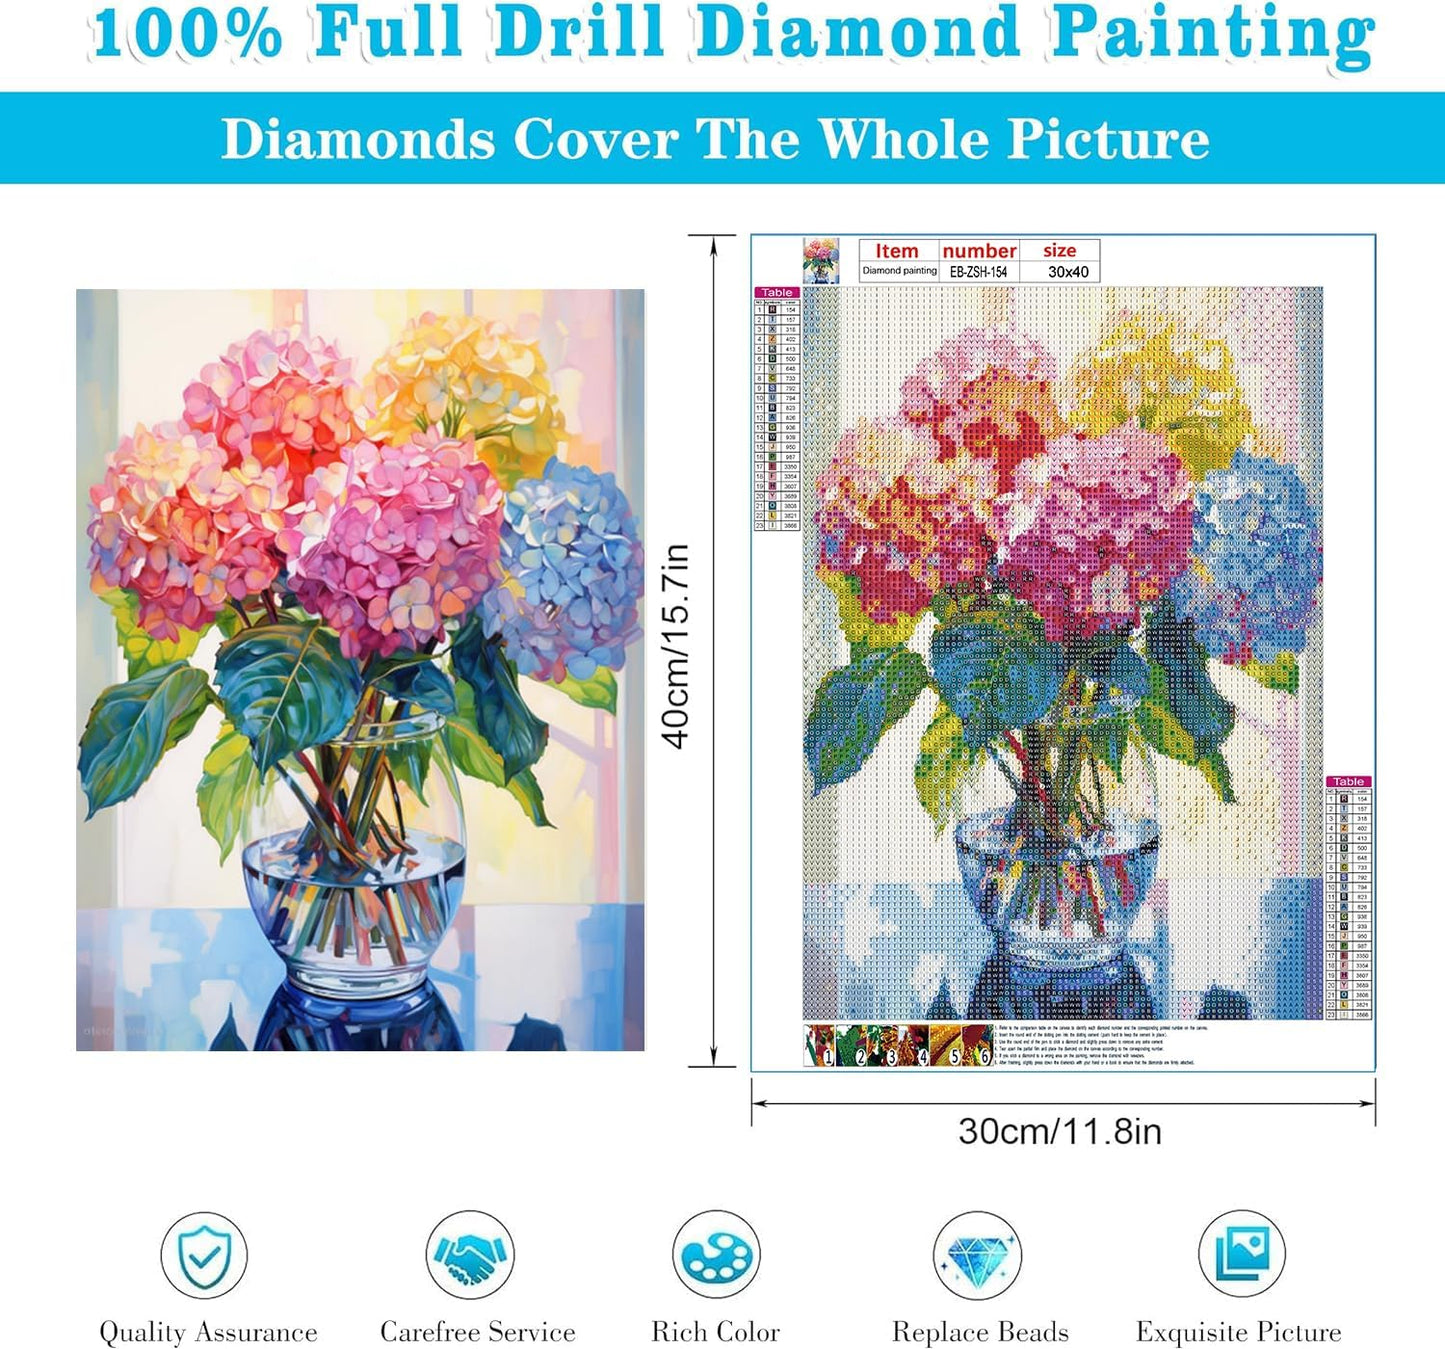 Diamond Painting Kits for Adults, Hydrangea in Glass 5D Diamond Art Kits for Beginner DIY Full Drill Diamond Dots Crystal Craft Kits for Home Wall Decor Gifts 11.8X15.7 Inch